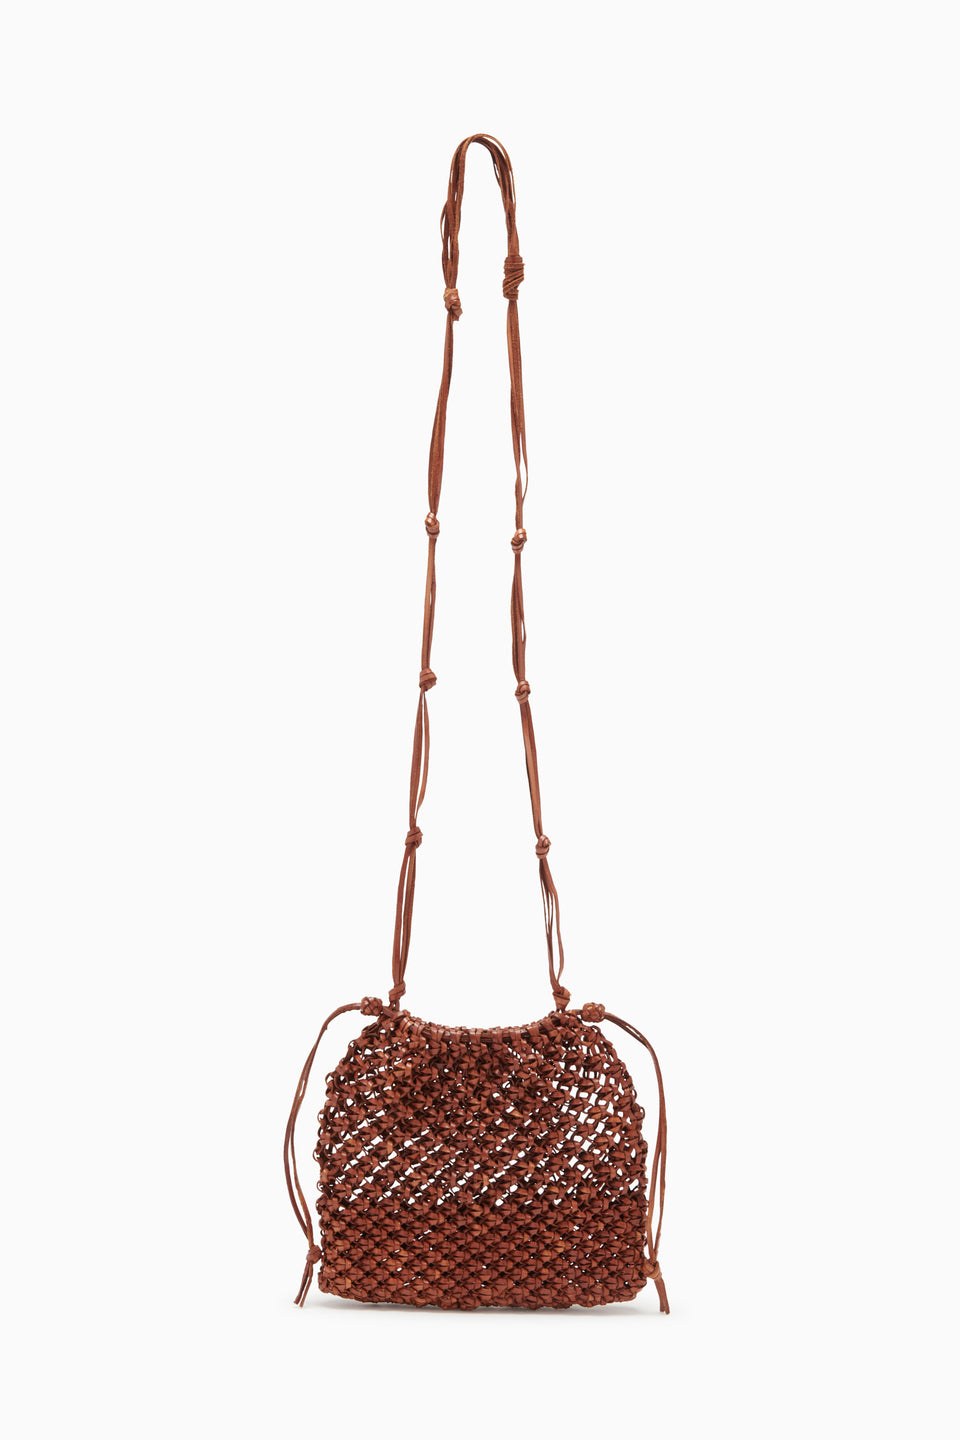 Tulia Knotted Crossbody - Pecan Brown